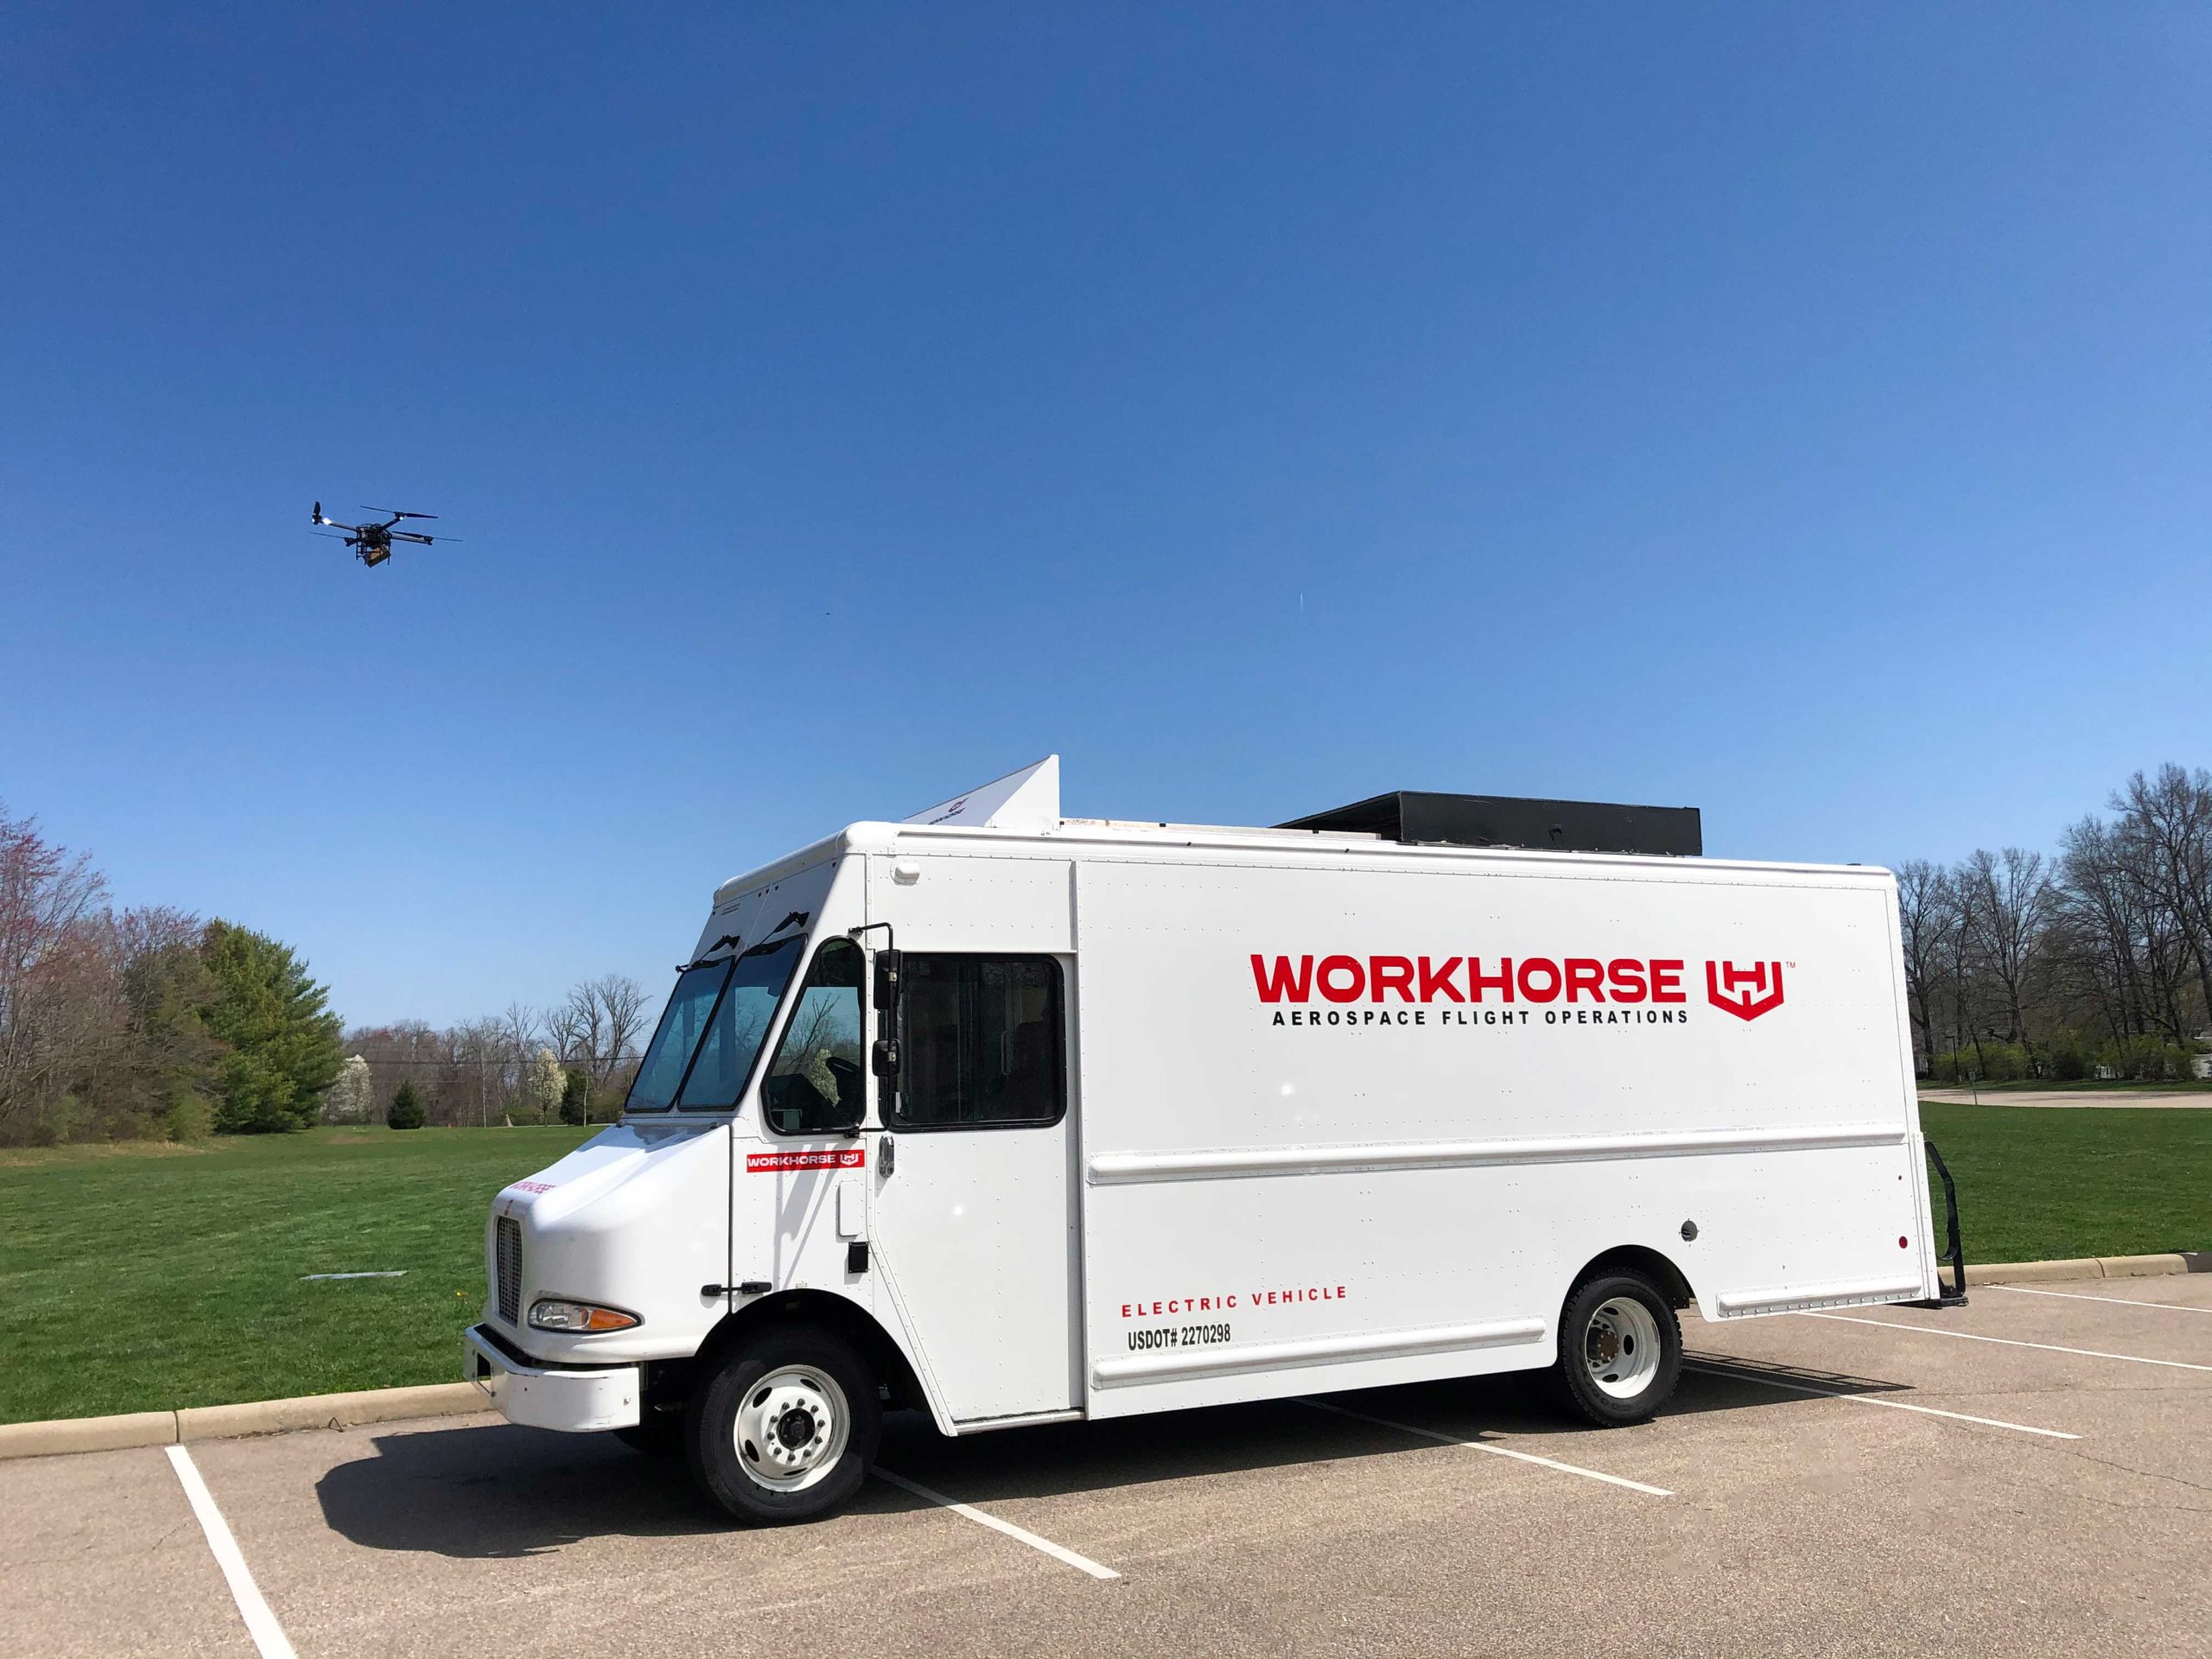 workhorse news today